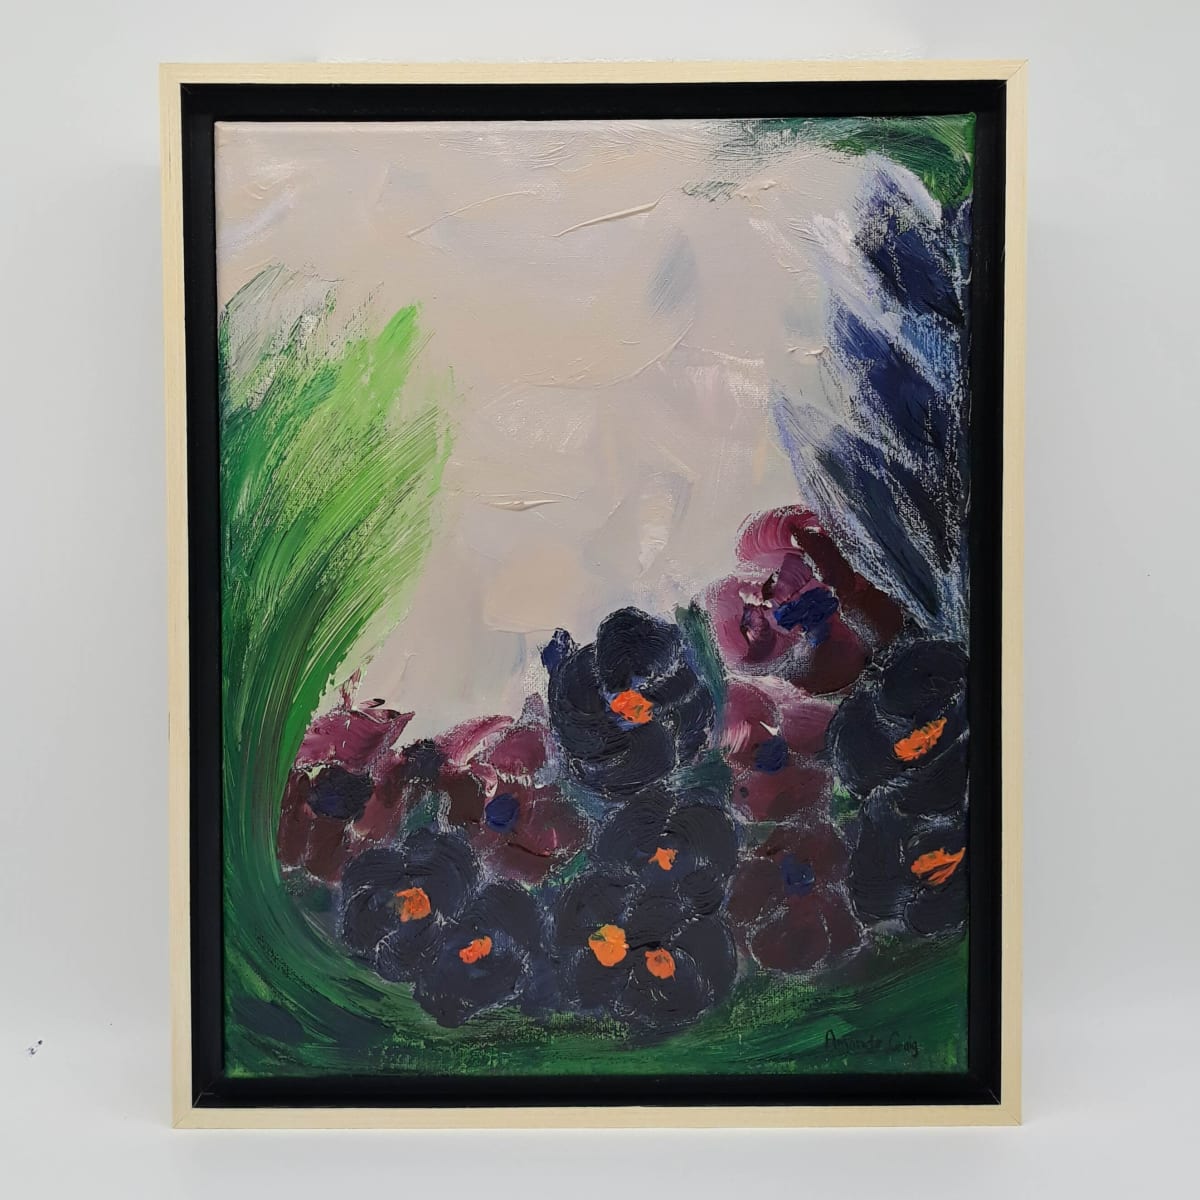 As a Flower of the Field by Amanda Craig  Image: Original mixed media on wrapped canvas in floating wood frame. Loose floral in acrylic and pastel. No varnish. Inspired by Psalm 103:15, "As for man, his days are like grass; As a flower of the field, so he flourishes." 